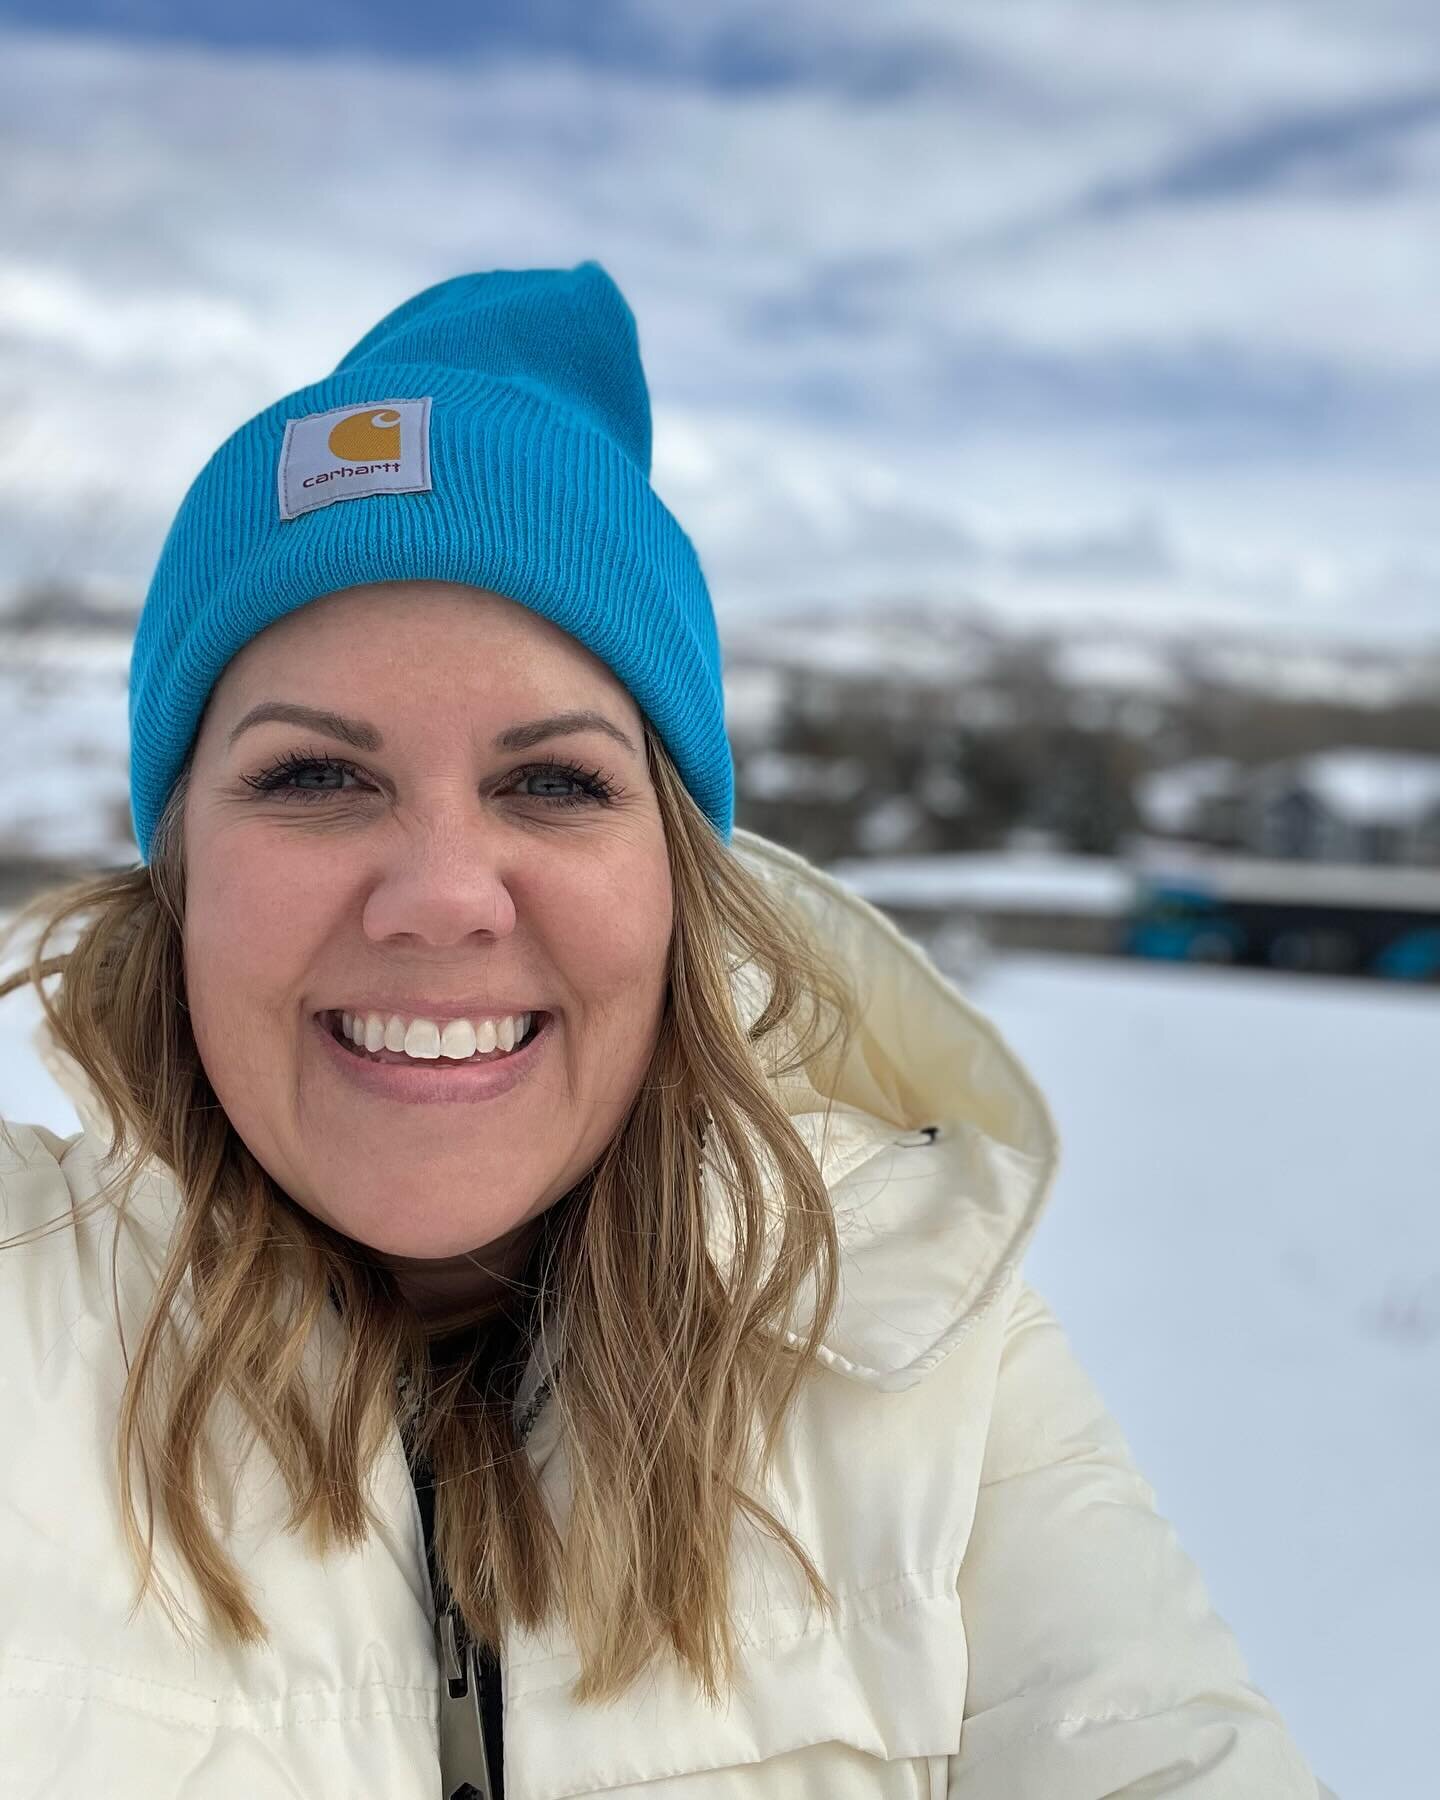 When you can&rsquo;t ski, you take the kids sledding! This mountain air and elevation is no joke for your sea level Florida girl, though. Whew! 😅 

#parkcity #snowymountains #snowyday #snow #mountains #authorsofinstagram #authorlife